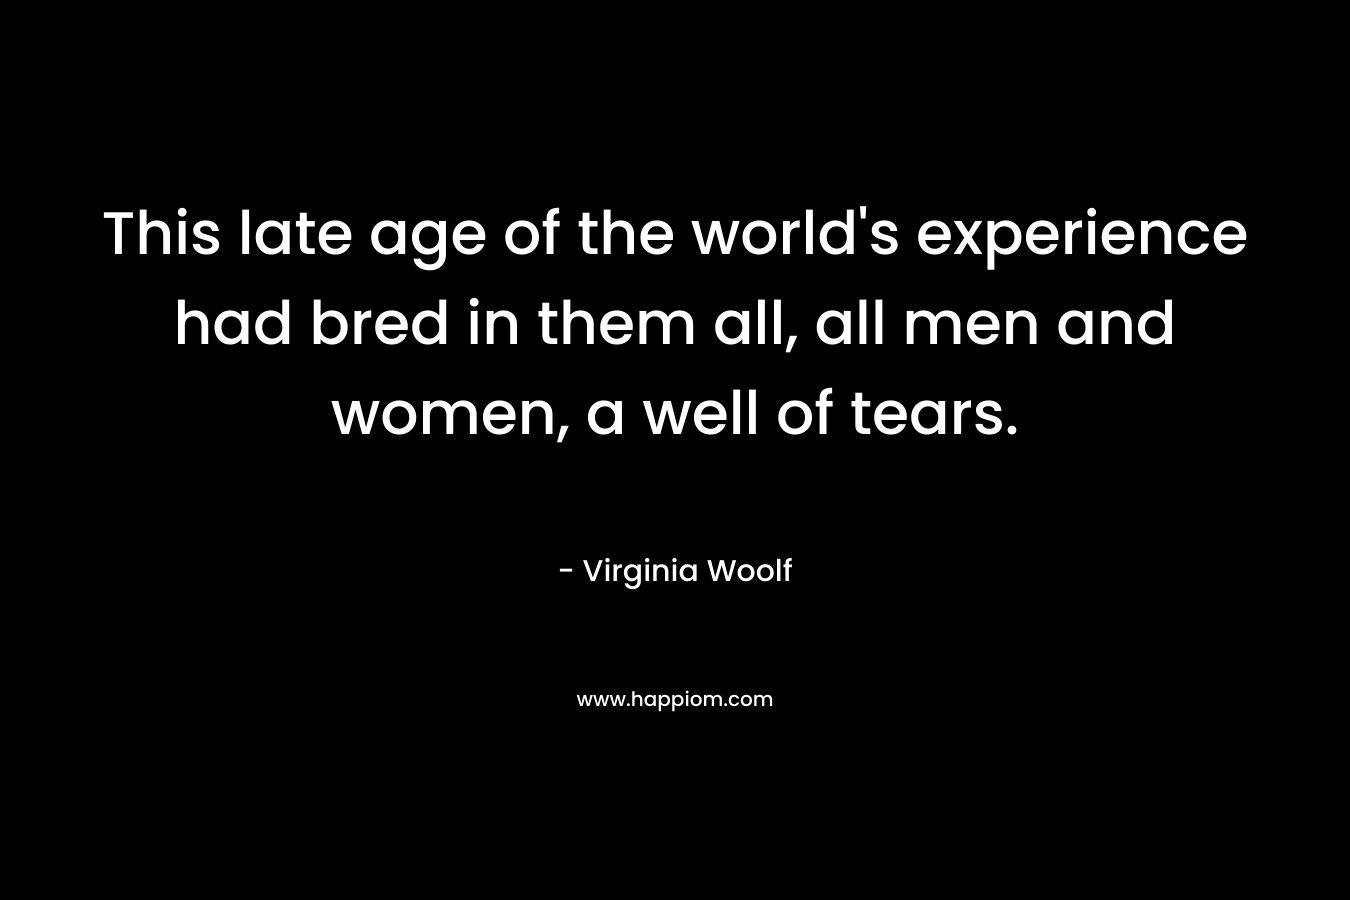 This late age of the world's experience had bred in them all, all men and women, a well of tears.